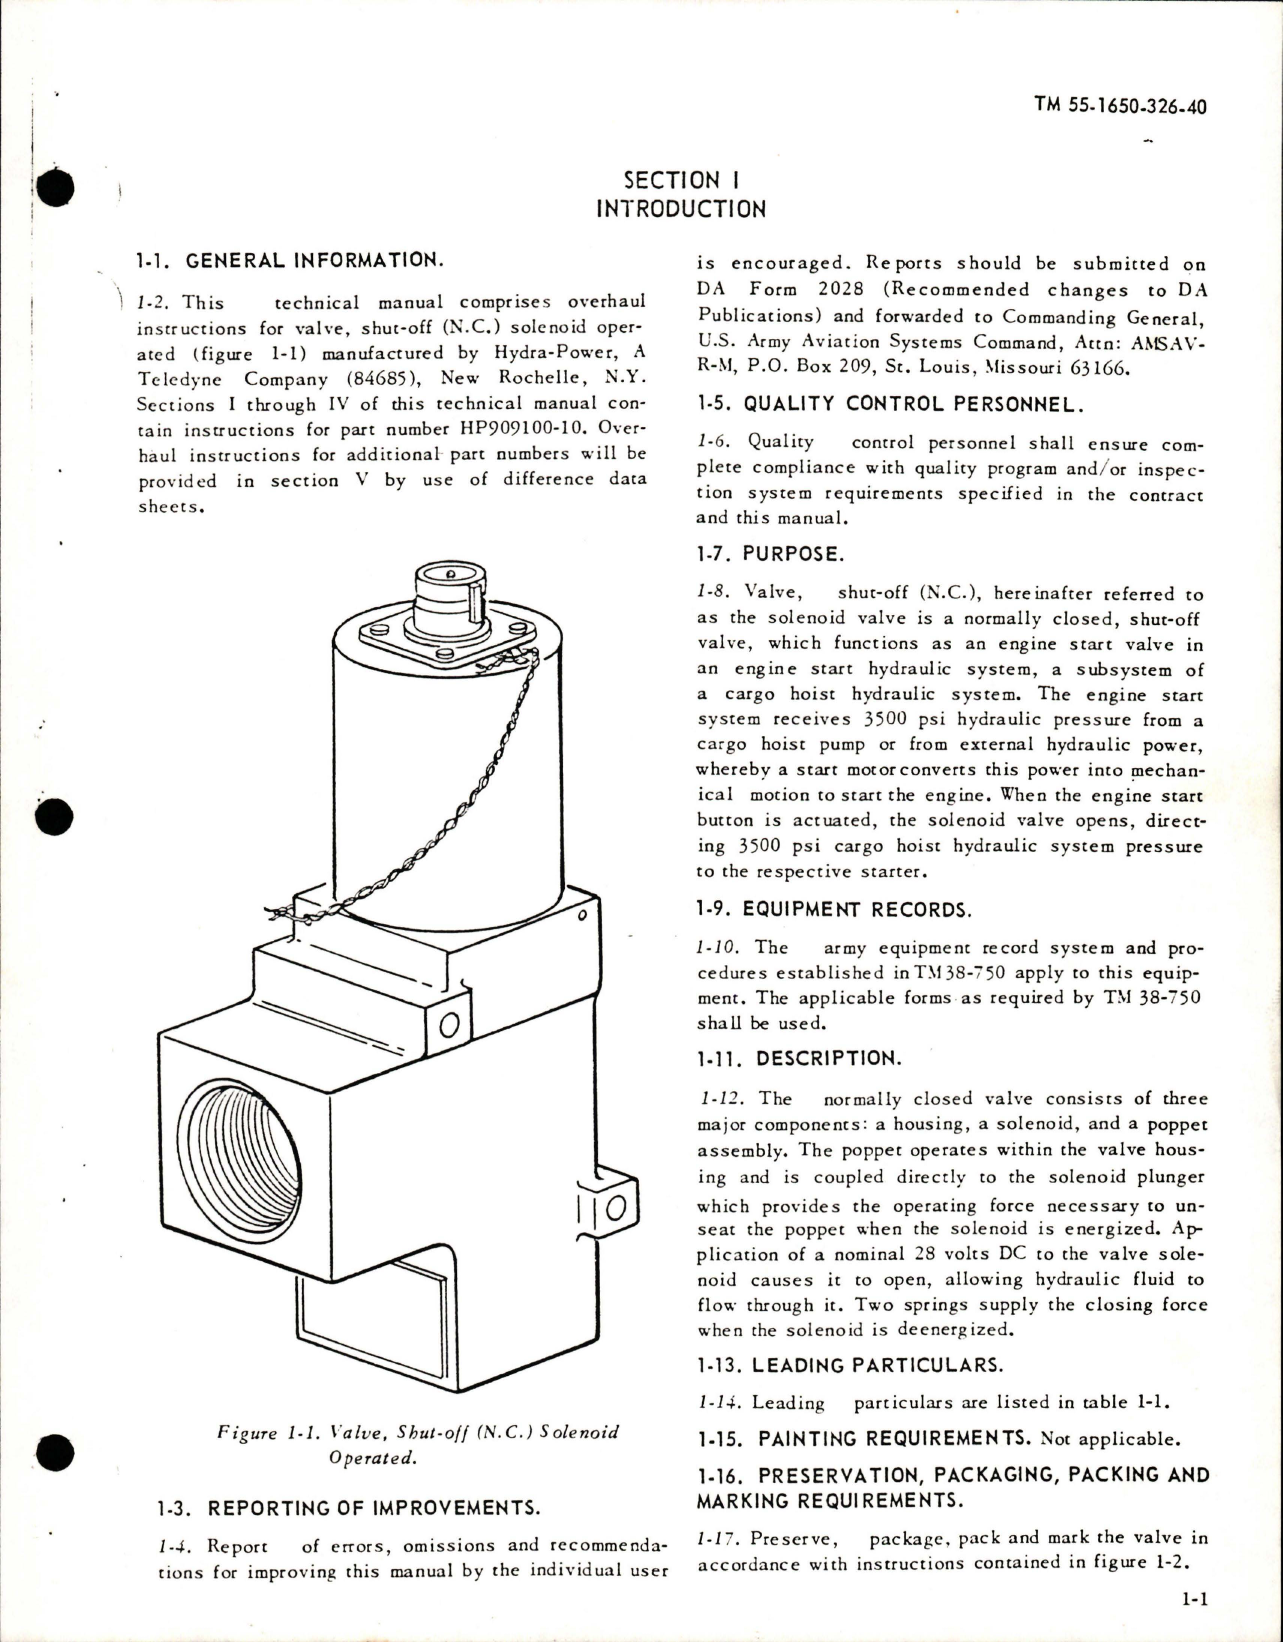 Sample page 5 from AirCorps Library document: Maintenance Instructions for Including Repair Parts and Special Tools List for Solenoid Valve - Part HP909100-10